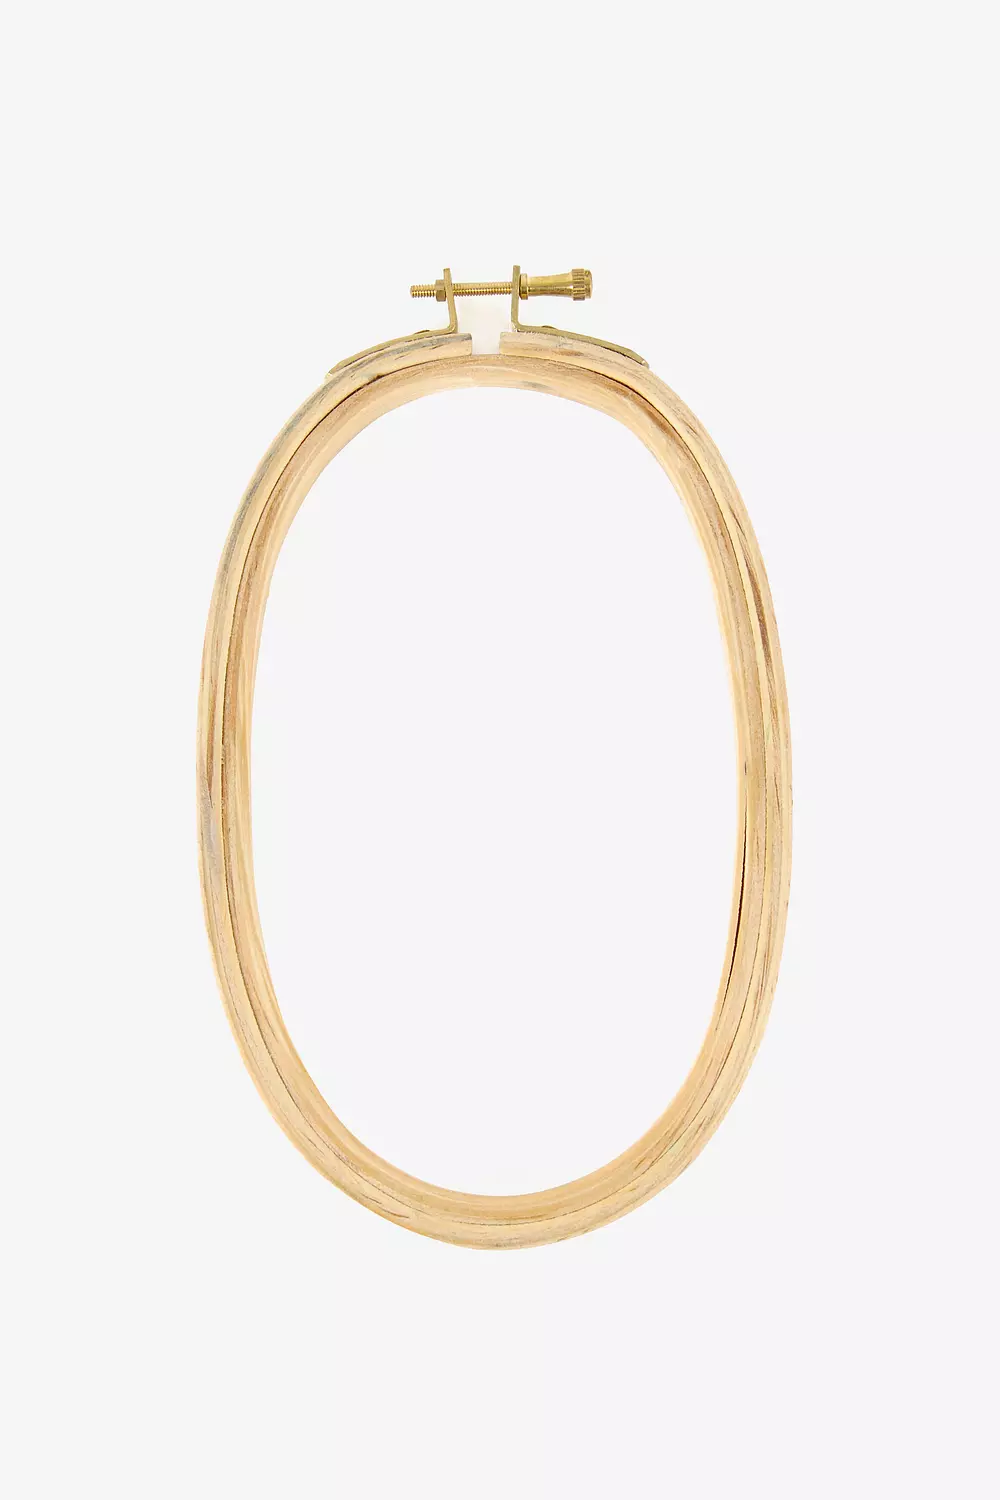 4 inch Wooden Embroidery hoop | 10 cm hoop with rounded edges